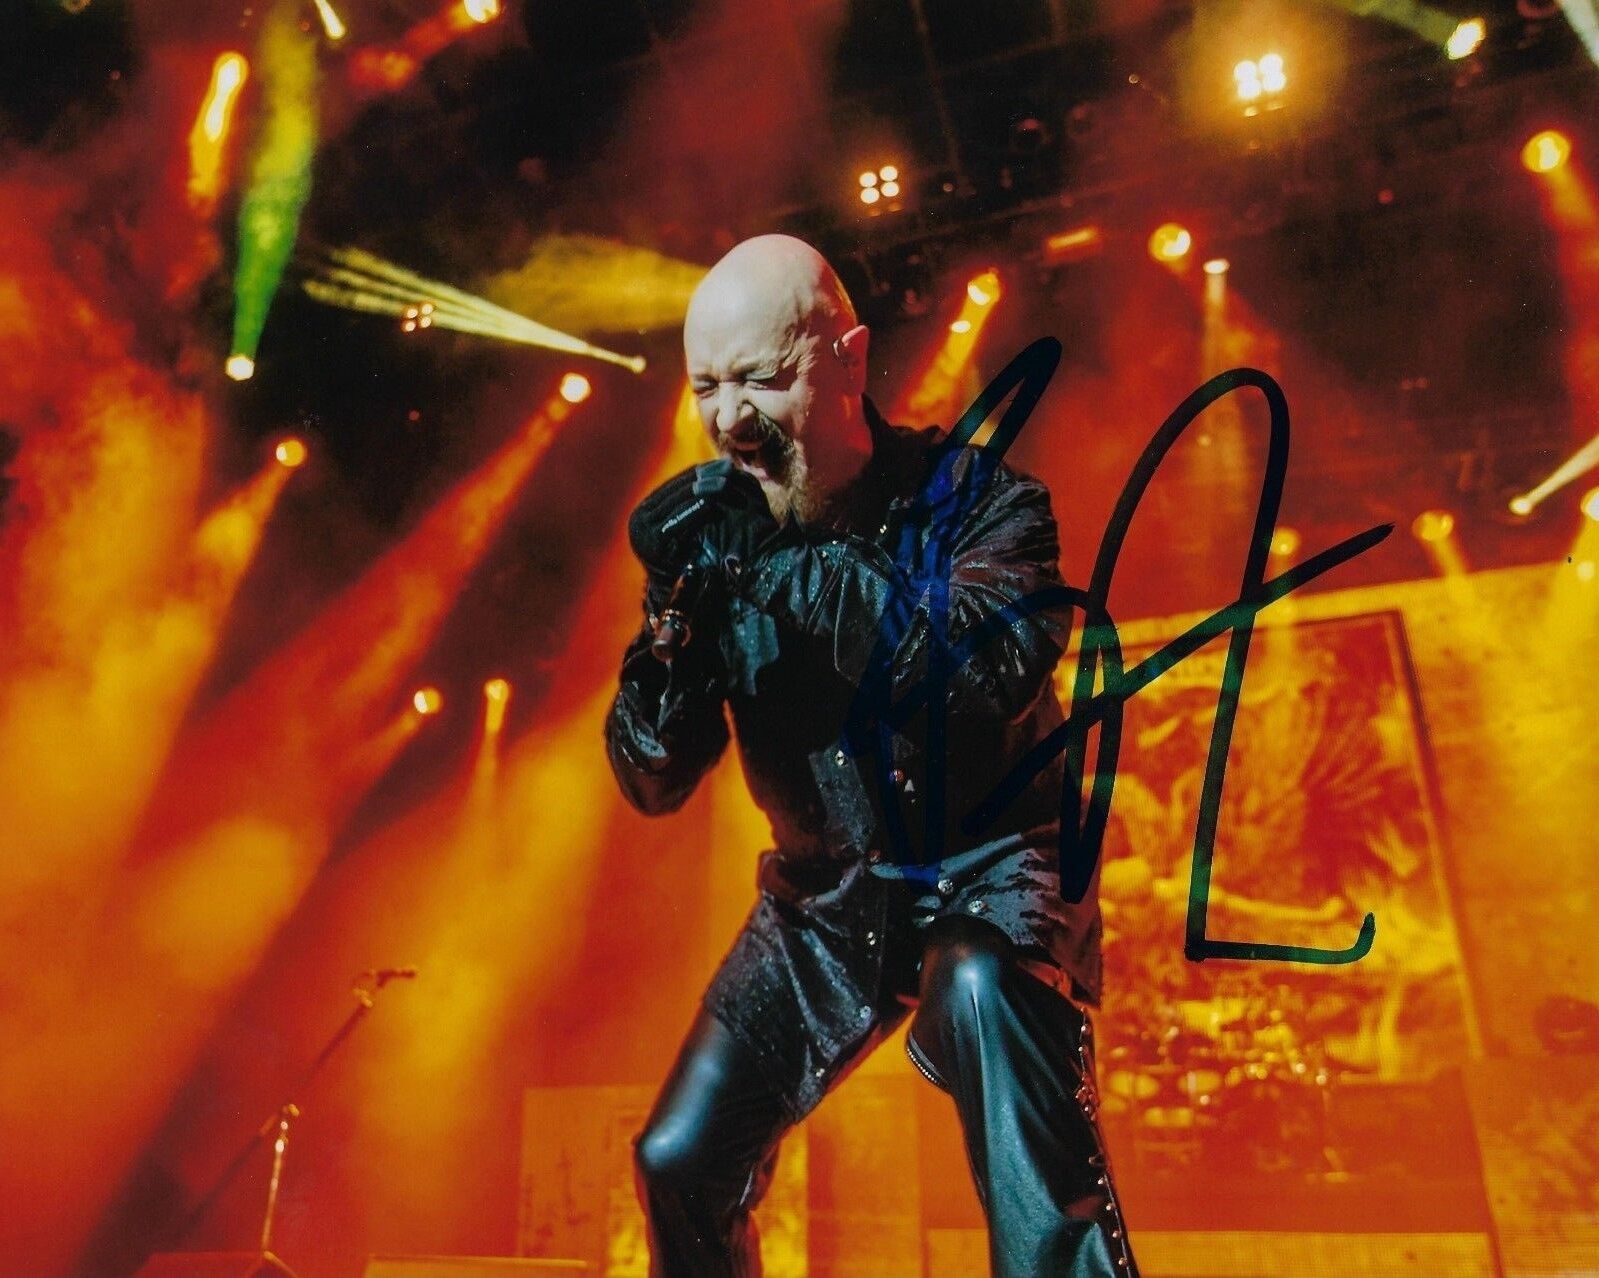 GFA Judas Priest Rock Star * ROB HALFORD * Signed 8x10 Photo Poster painting PROOF AD8 COA